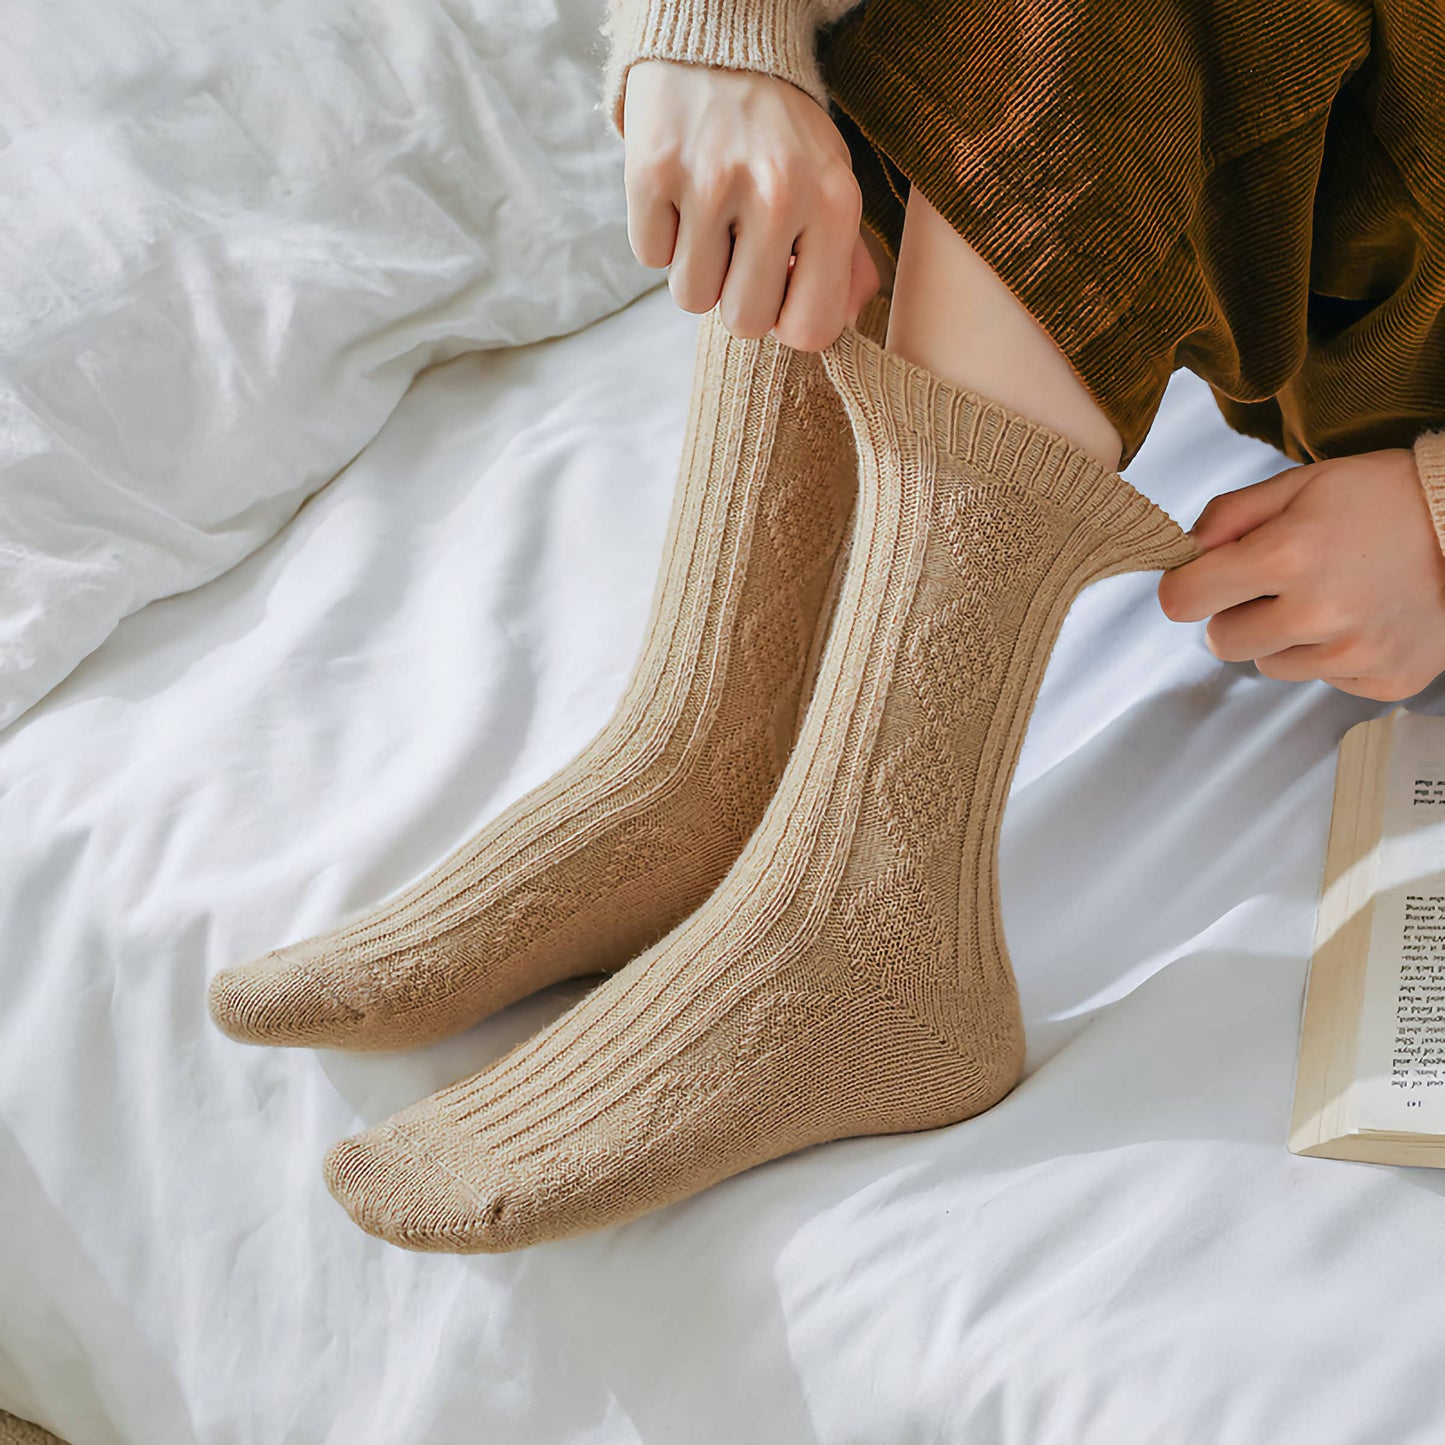 Warm Socks - Knitted Cashmere Crew Cozy Socks For Women: Brown